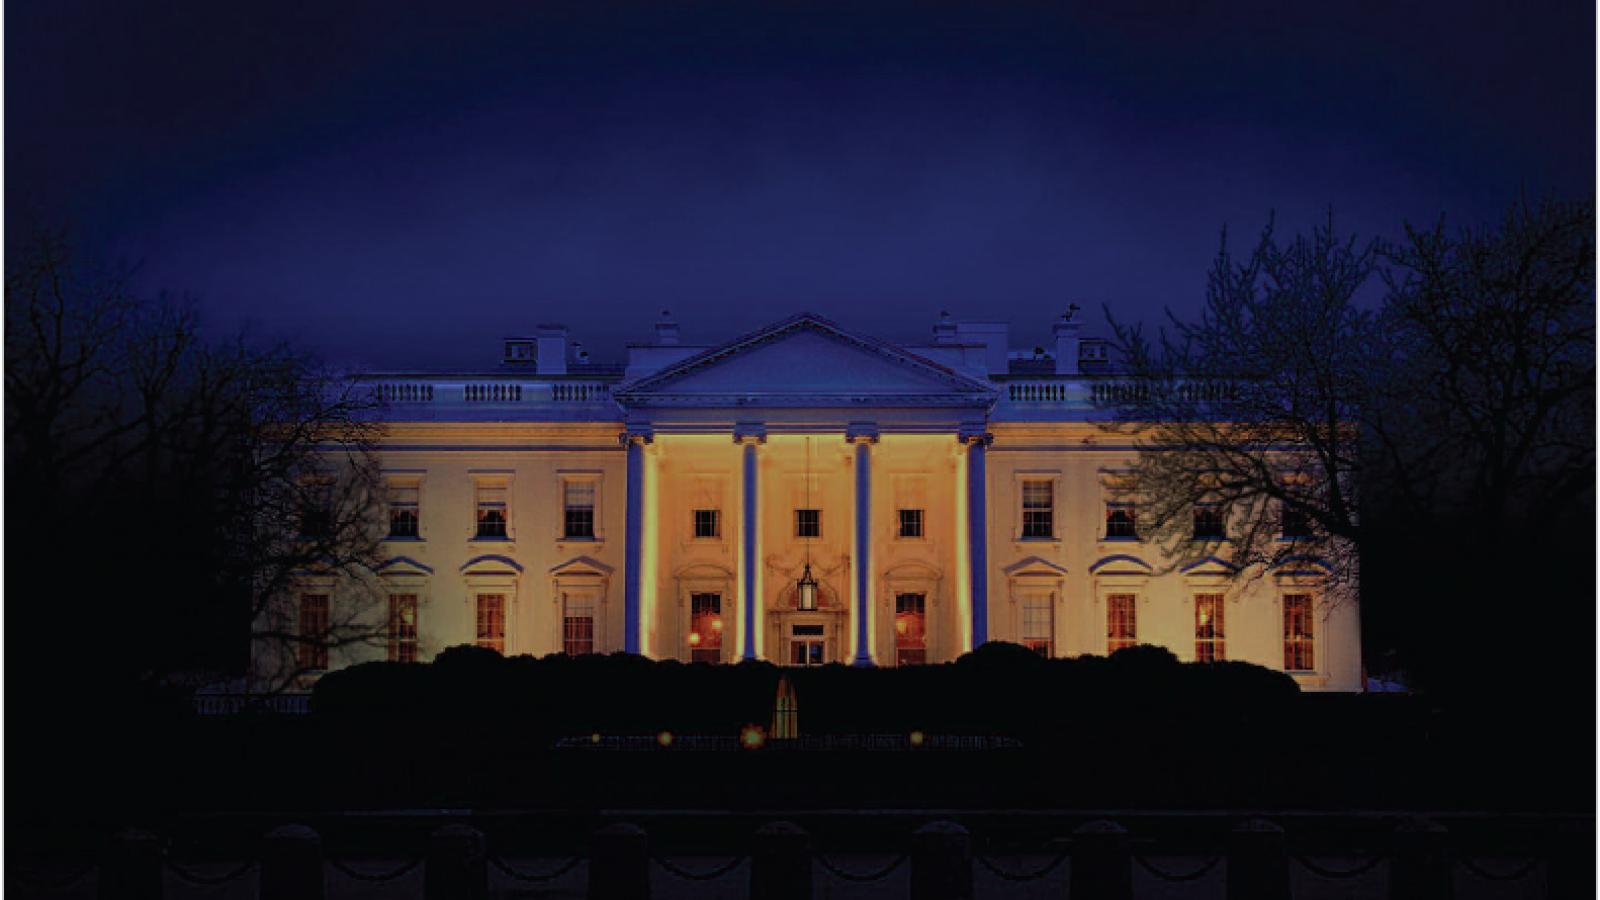 White House at night behind title American Creativity